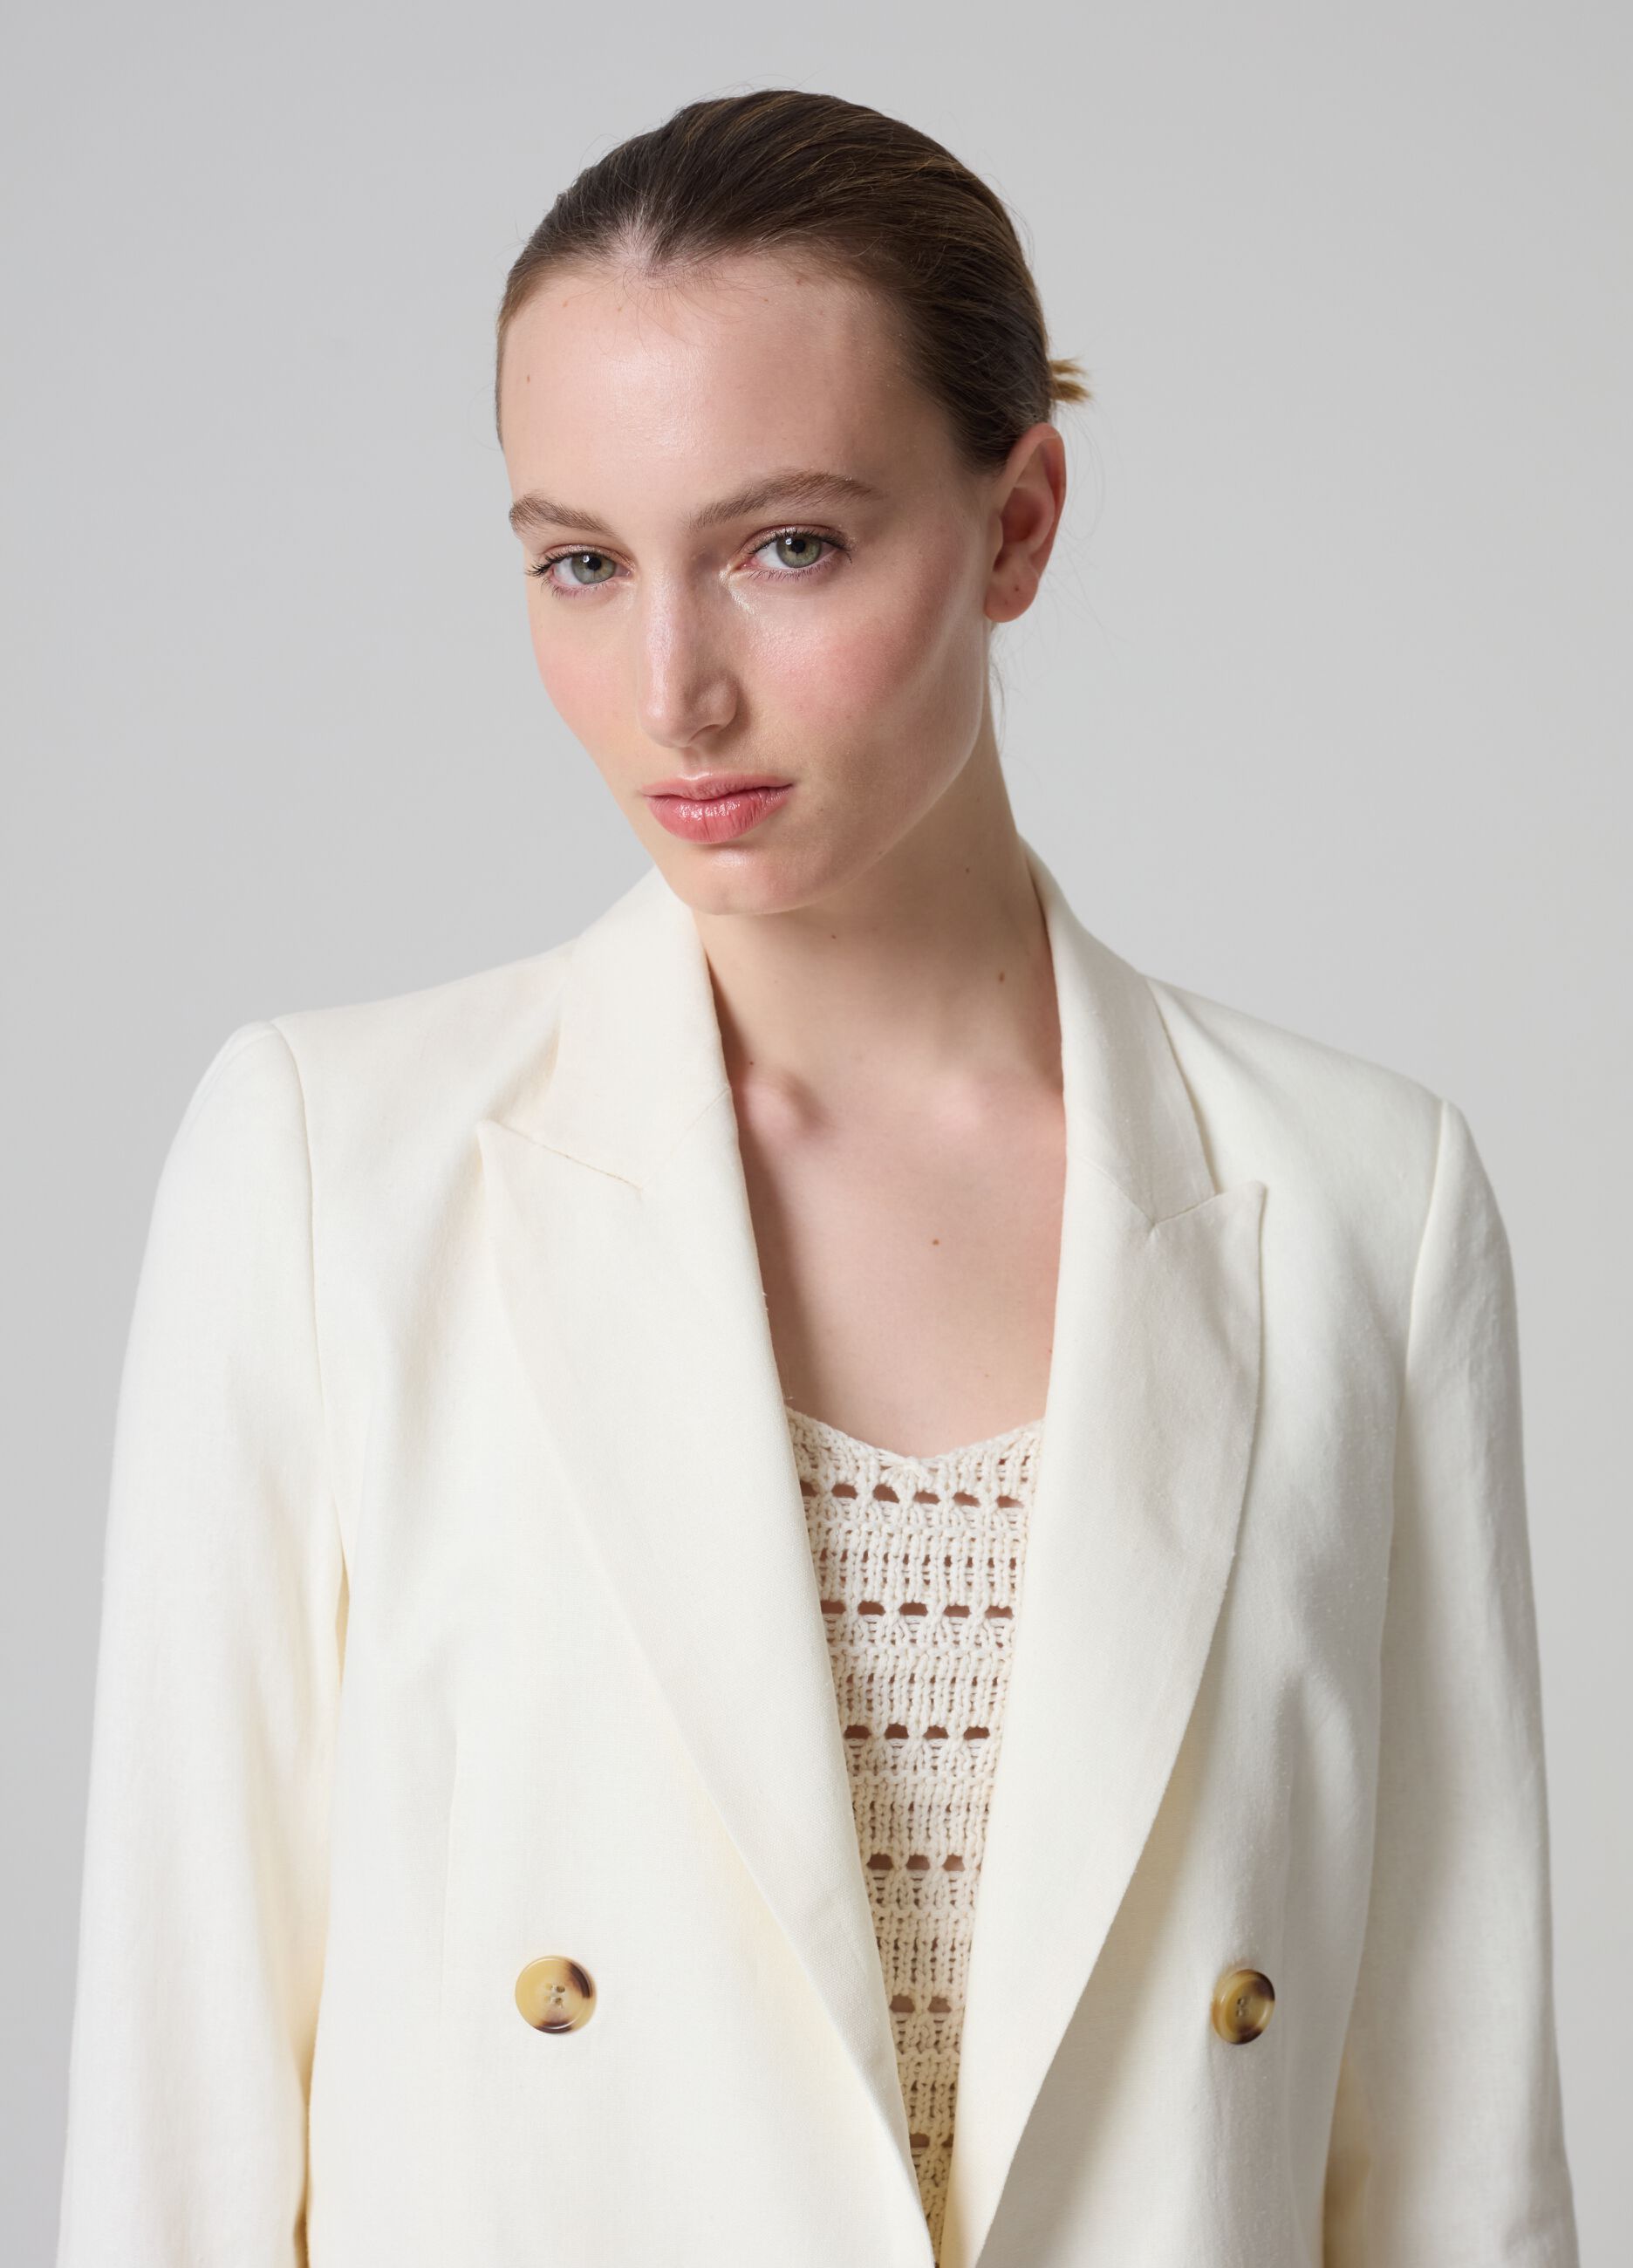 Contemporary double-breasted blazer